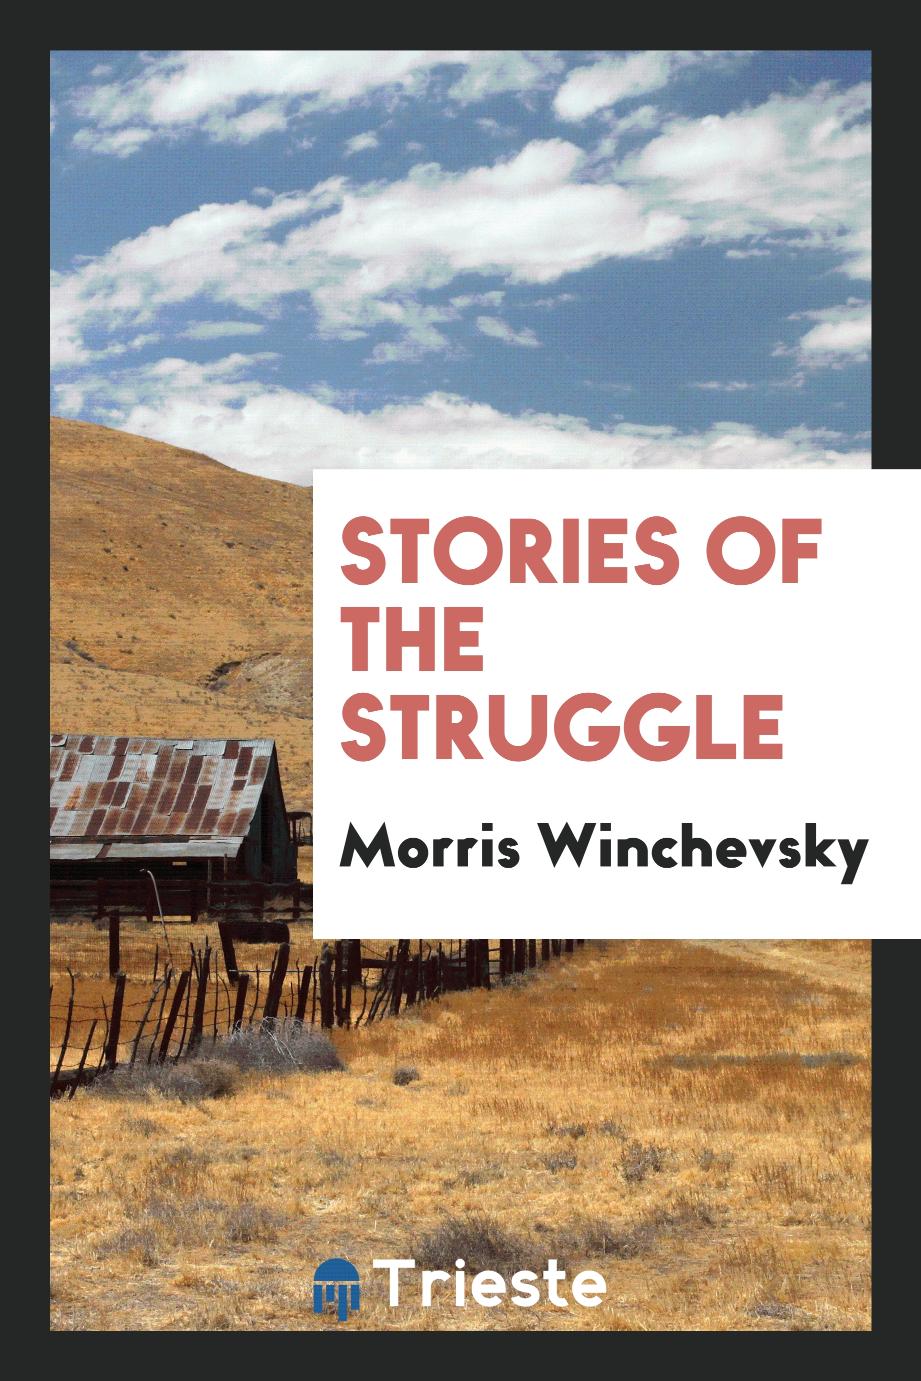 Stories of the Struggle